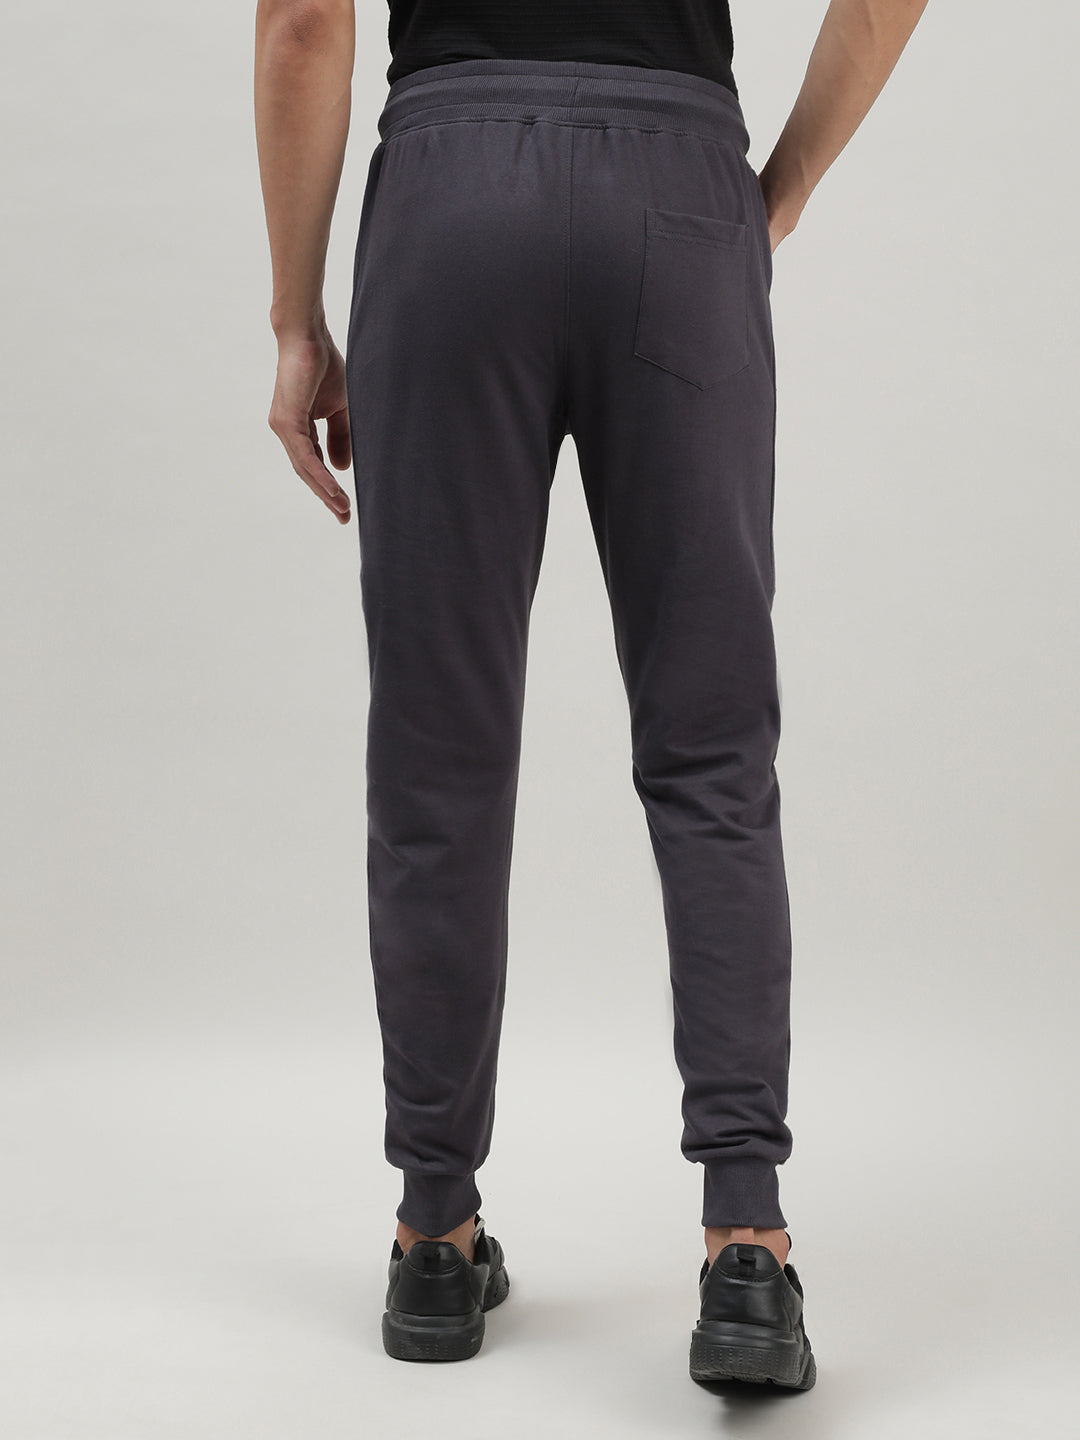 Charcoal Grey Casual Joggers for Men at Loom & Spin